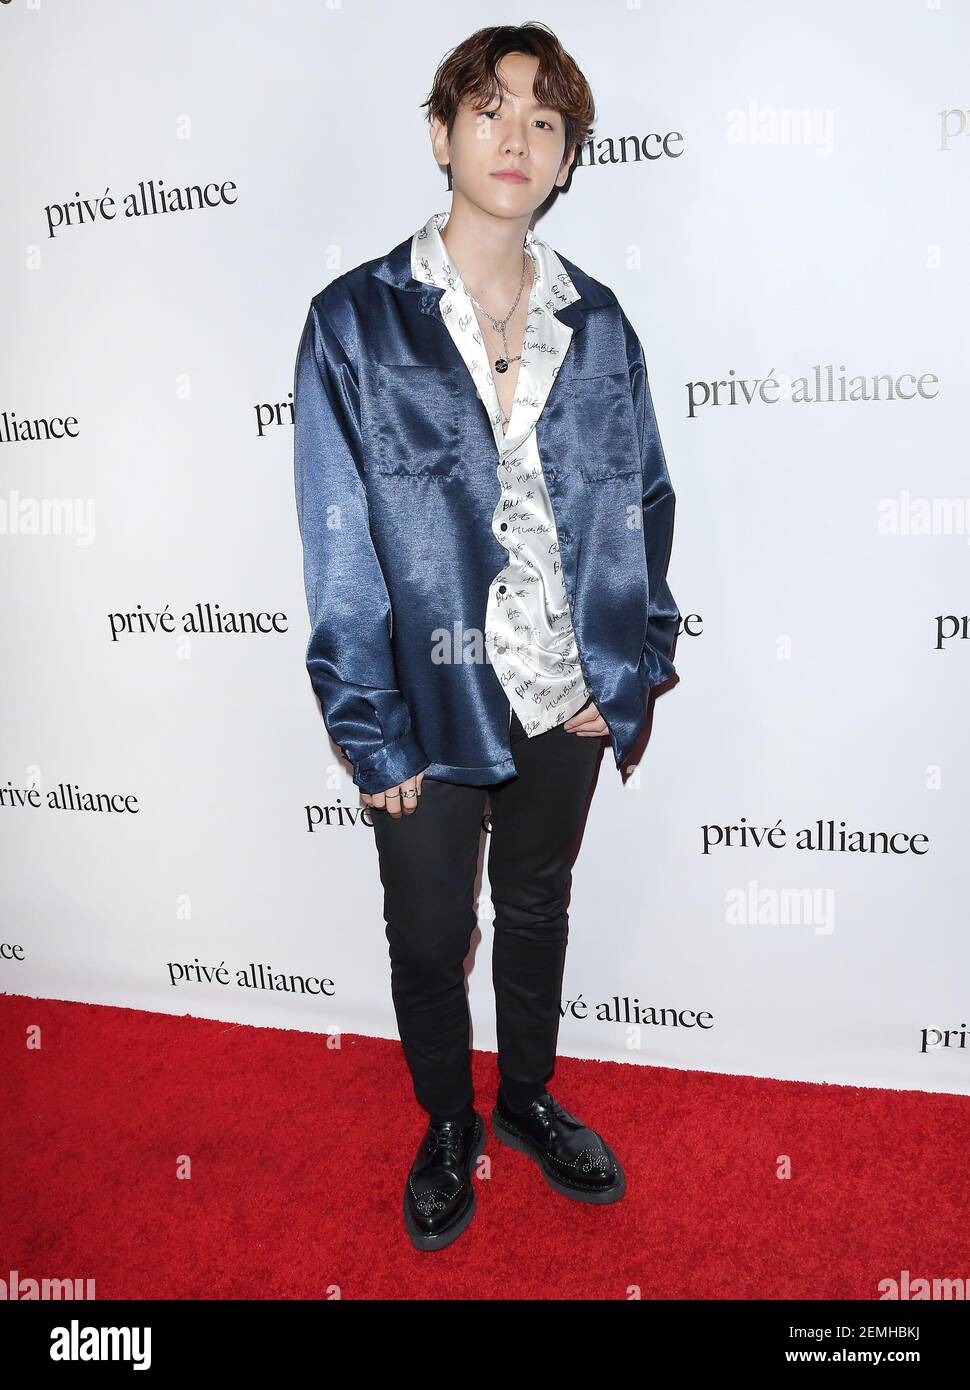 K-Pop Star Baekhyun of EXO arrives at Prive? Alliance Ready-To-Wear Fashion Presentation held at the Academy Nightclub in Los Angeles, CA on Tuesday, February 26, 2019. (Photo By Sthanlee B. Mirador/Sipa